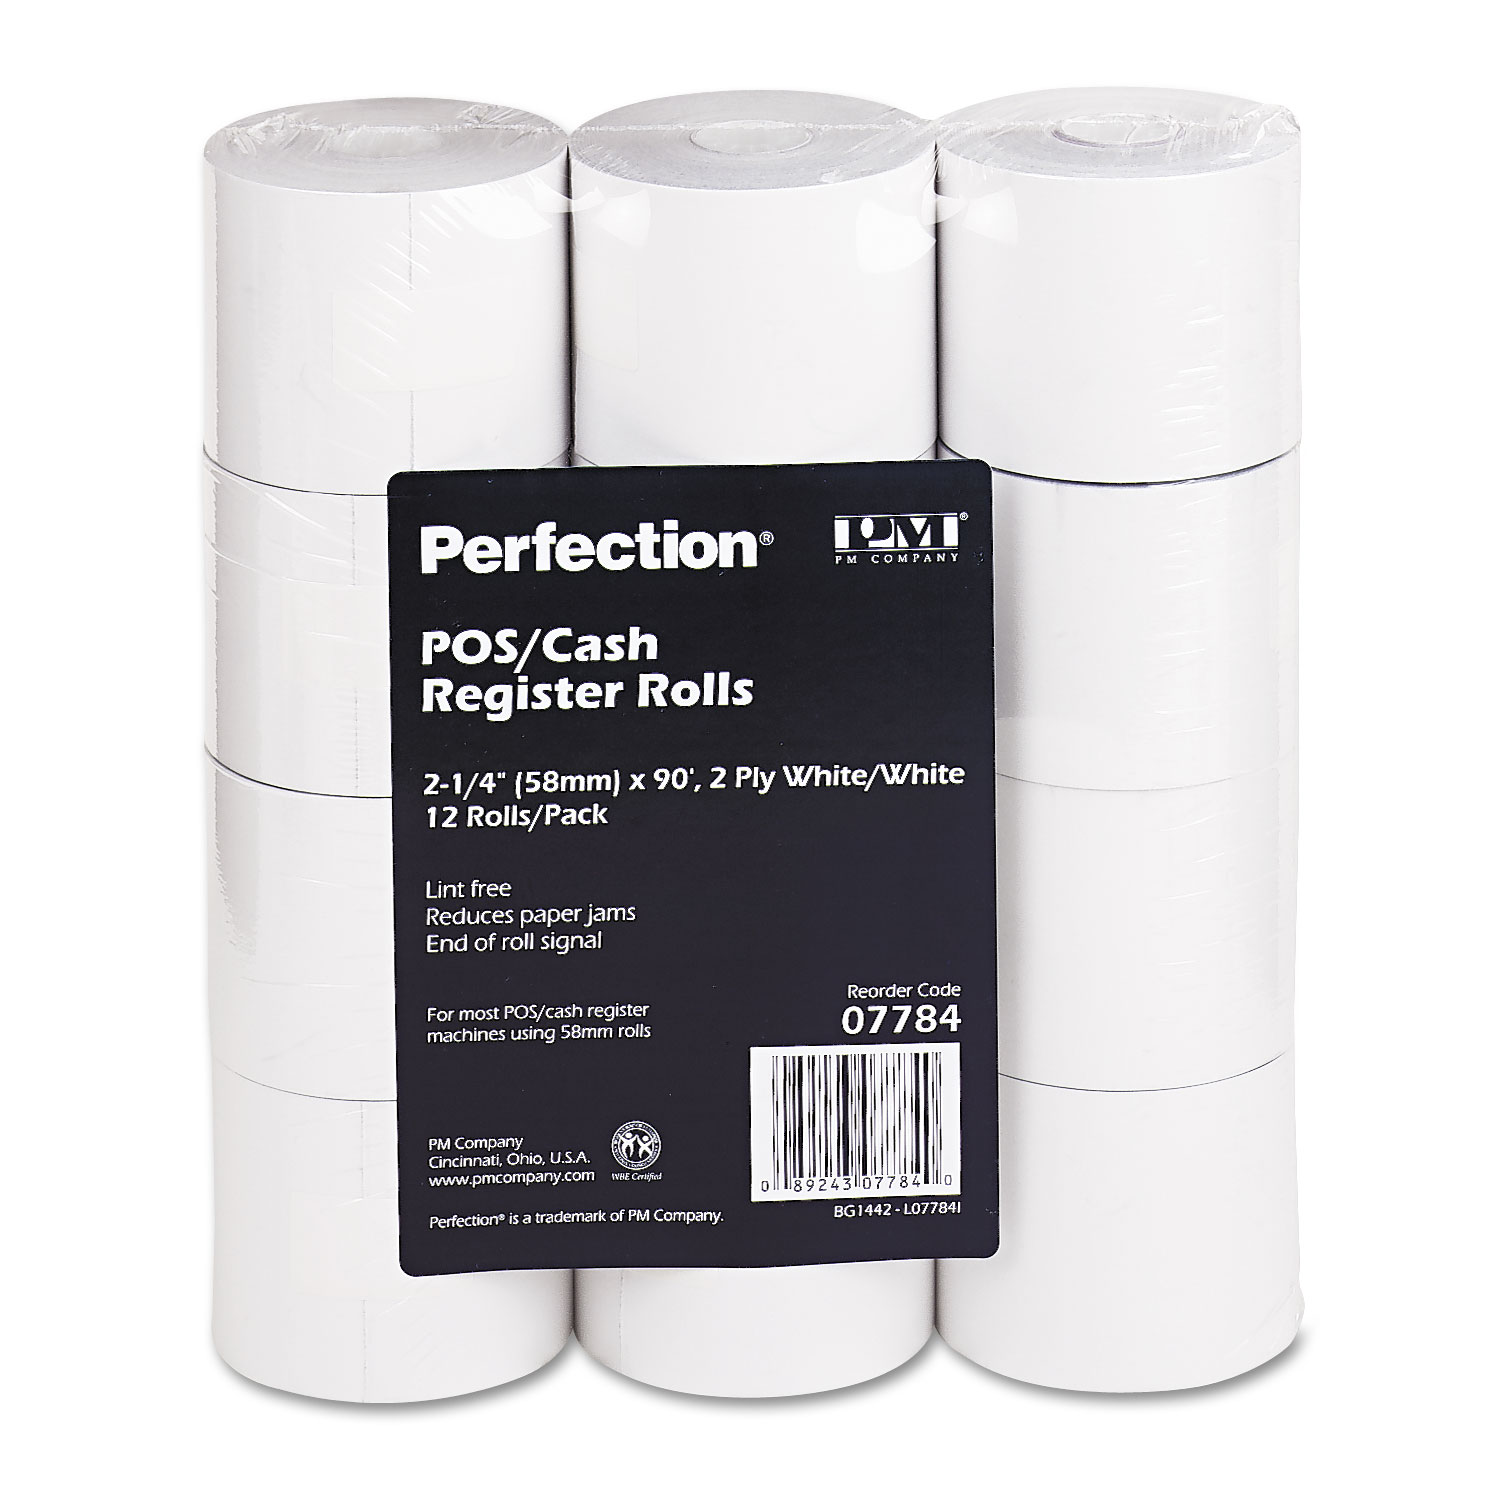  Iconex 7784 Impact Printing Carbonless Paper Rolls, 2.25 x 90 ft, White/White, 12/Pack (ICX90770442) 